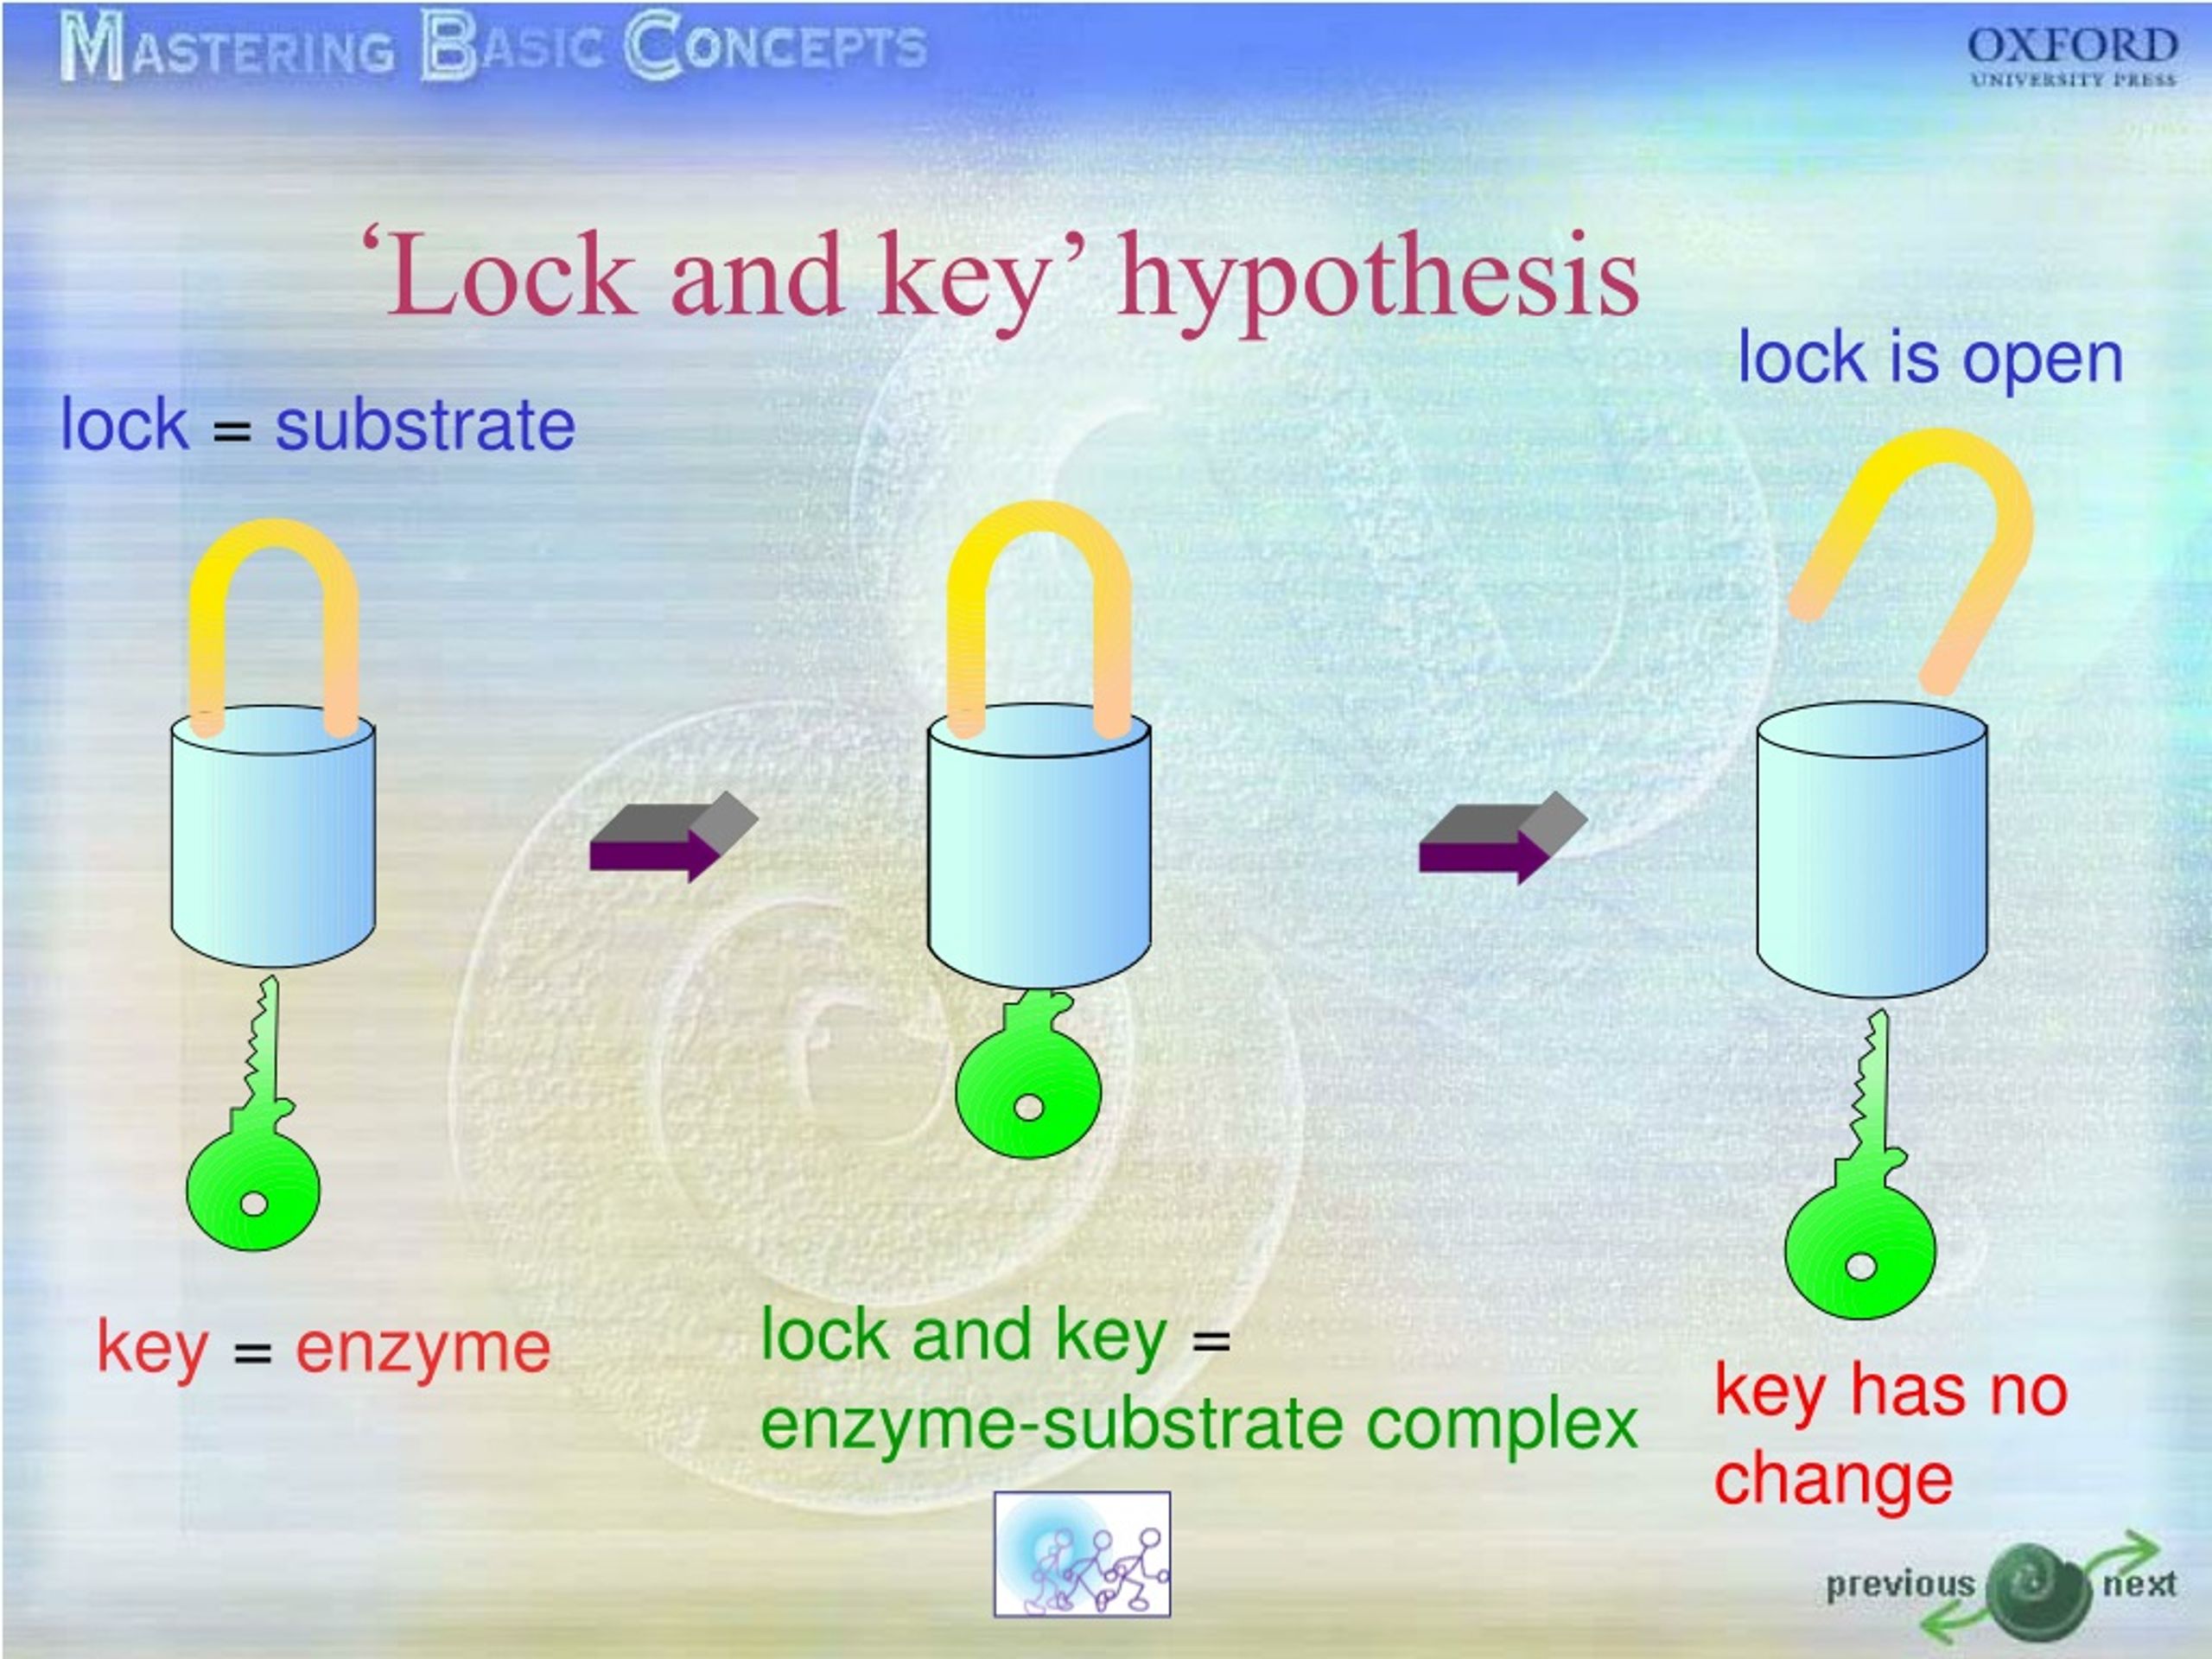 lock and key hypothesis was proposed by